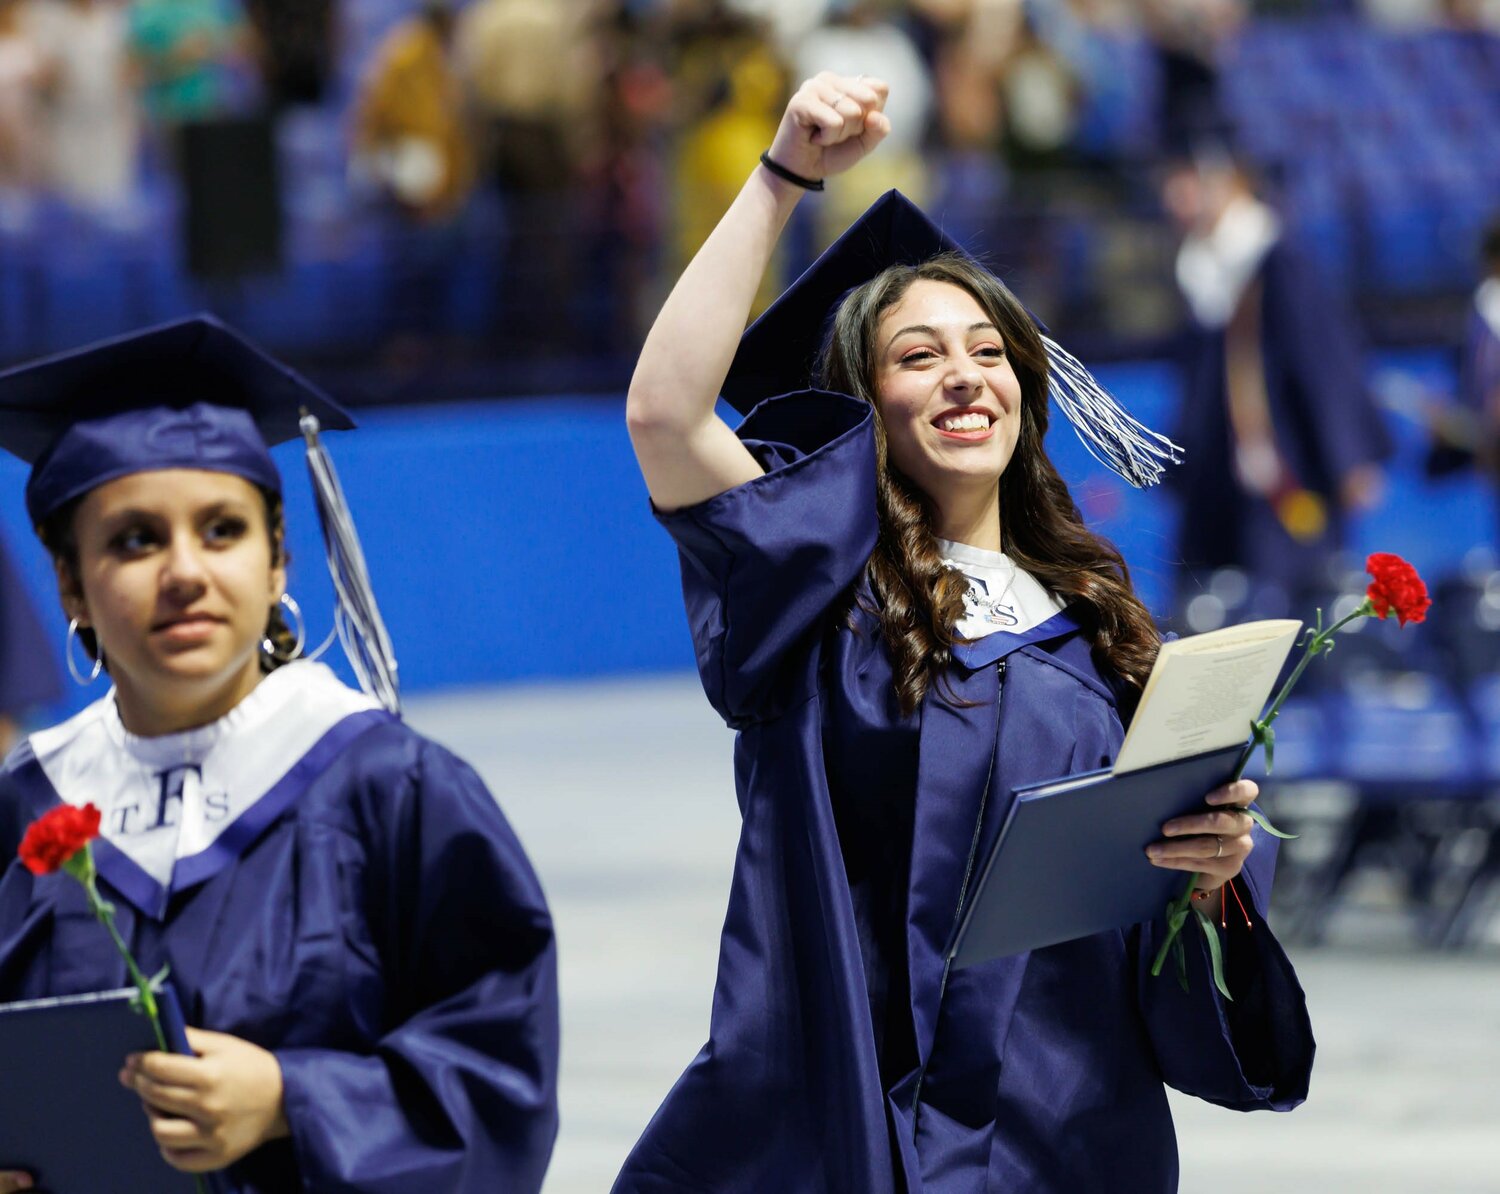 A fist bump seals the deal for one graduate at the Terry Sanford High School 2023 commencement Wednesday at the Crown Coliseum.